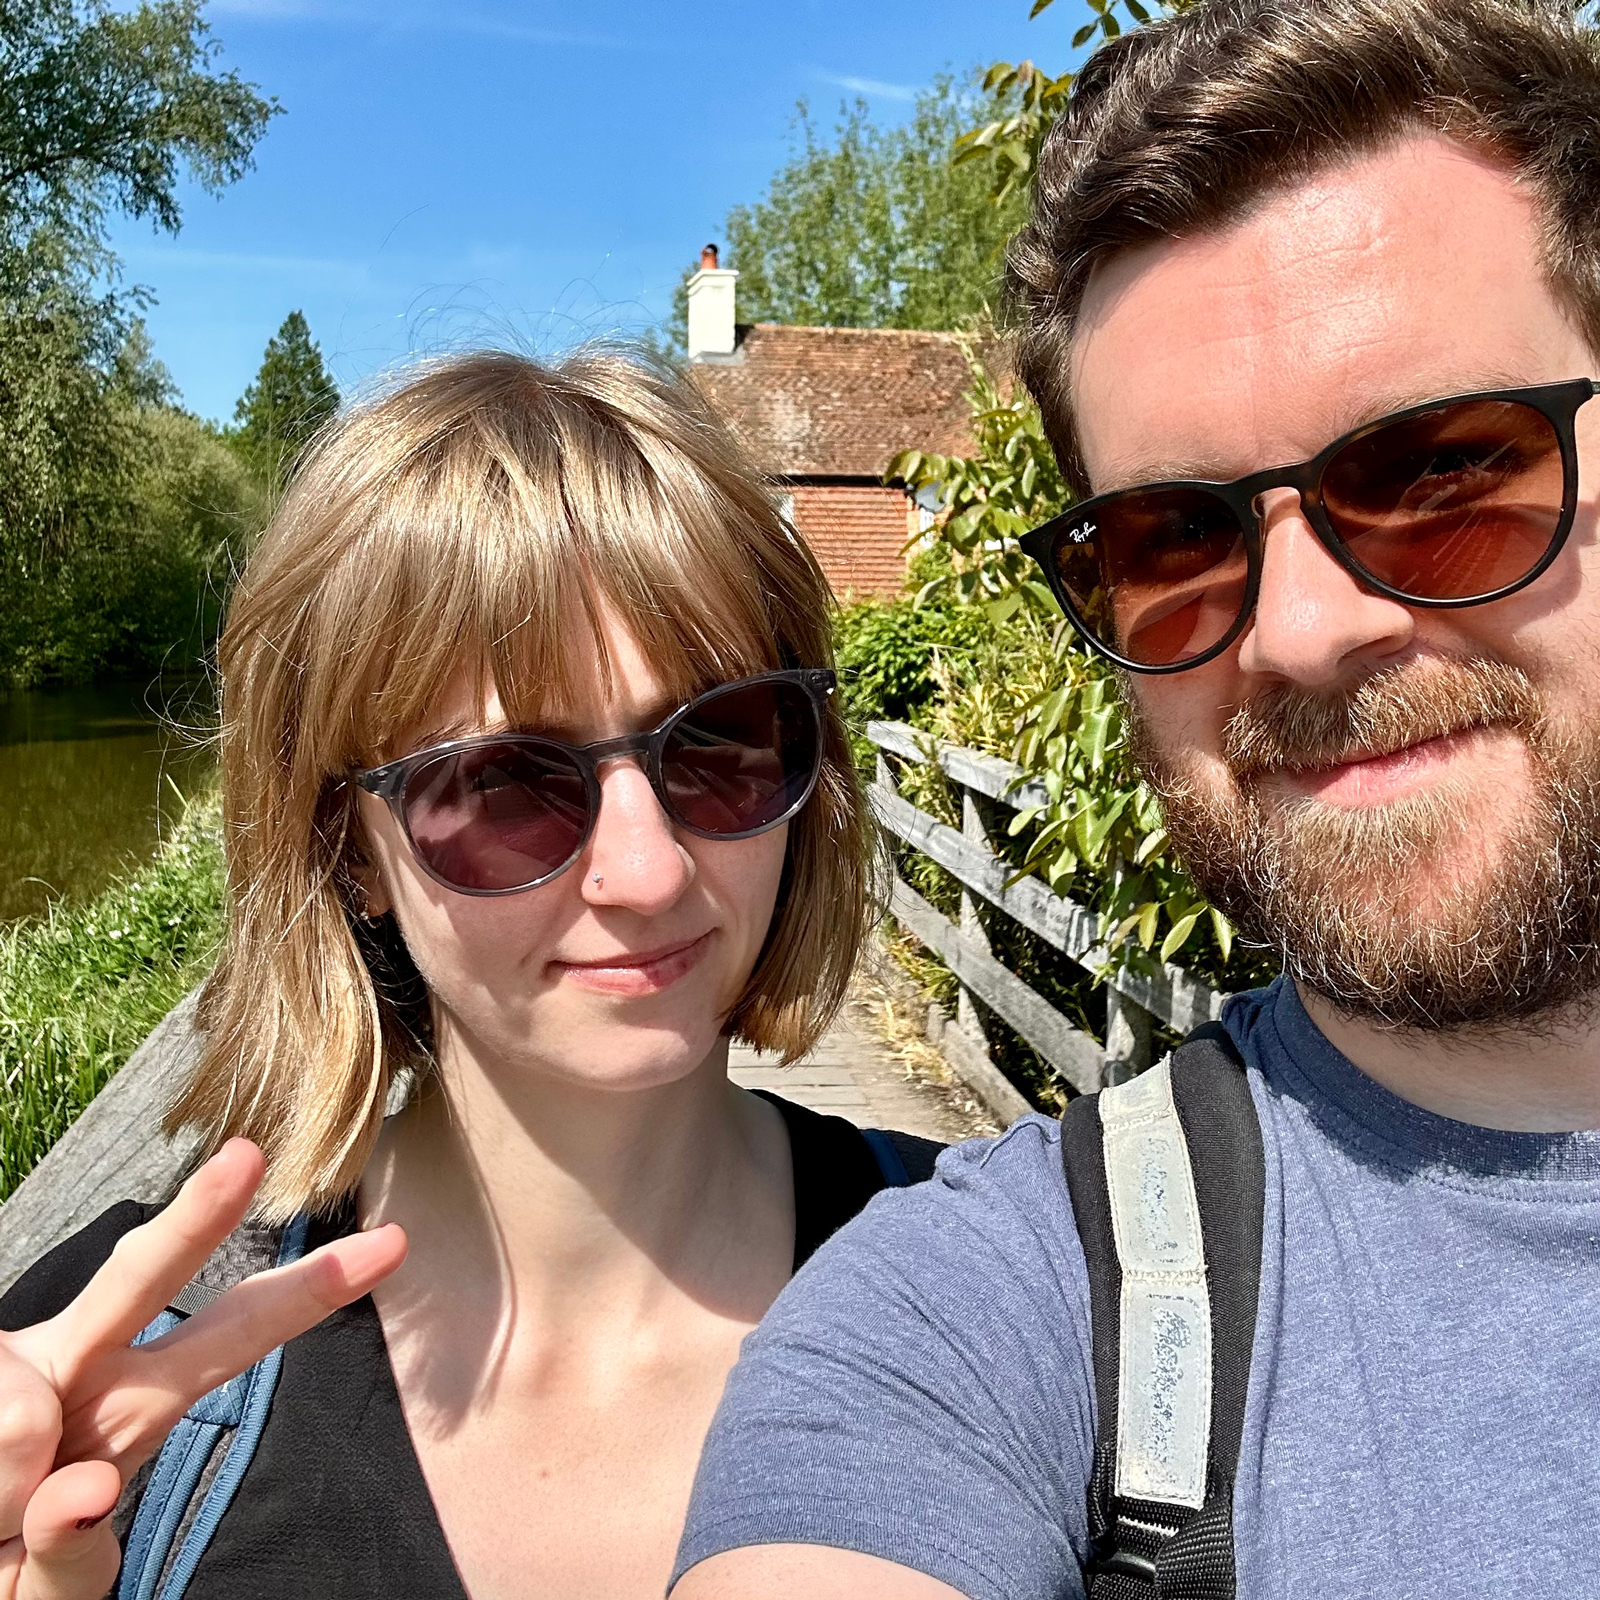 Me and Charlotte standing on a bridge by the canal. The sun is shining and everything is very green